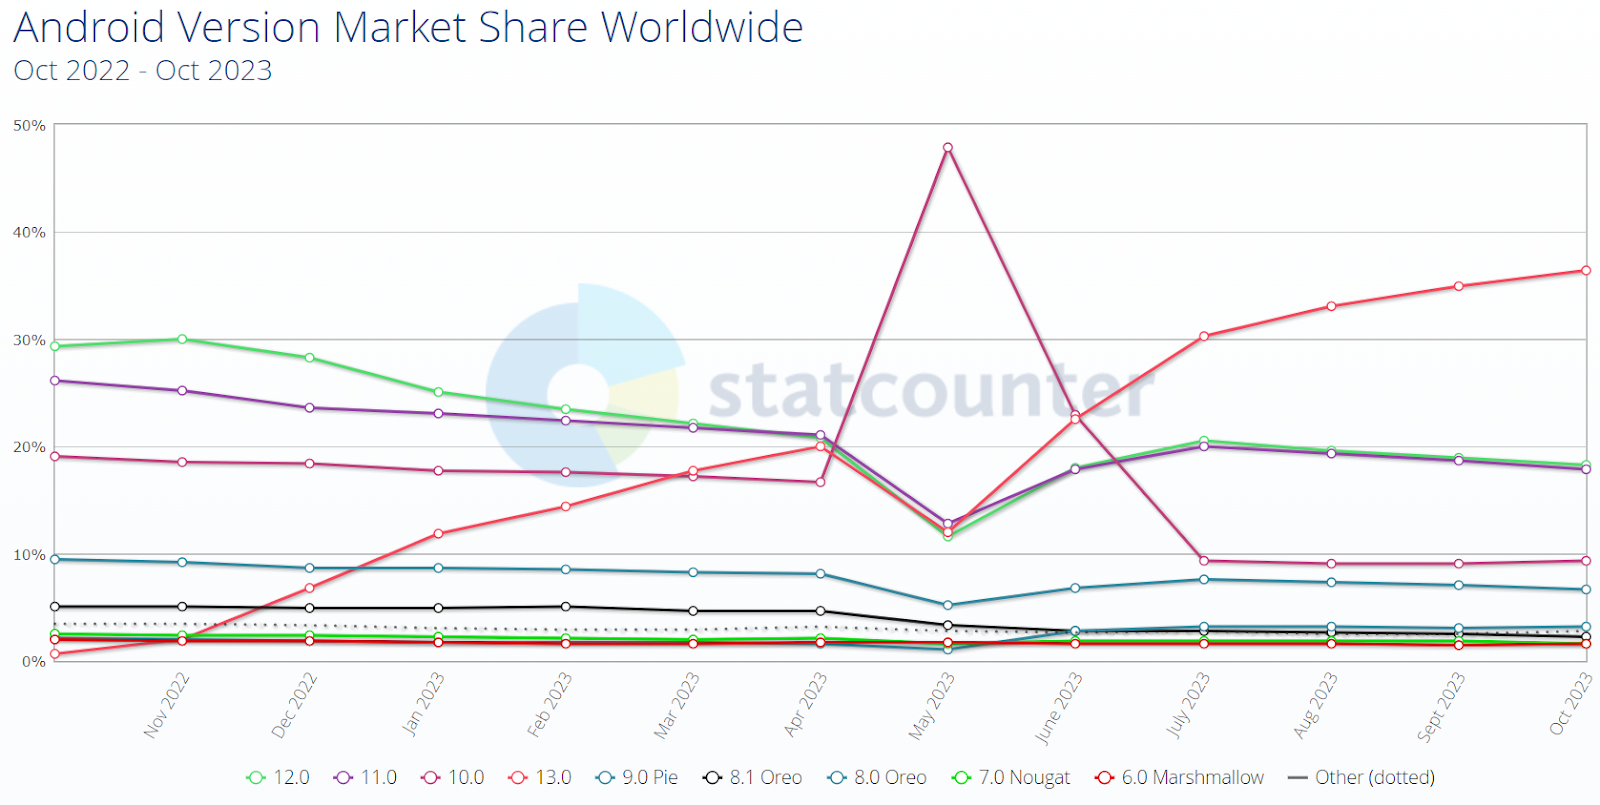 Android version market share